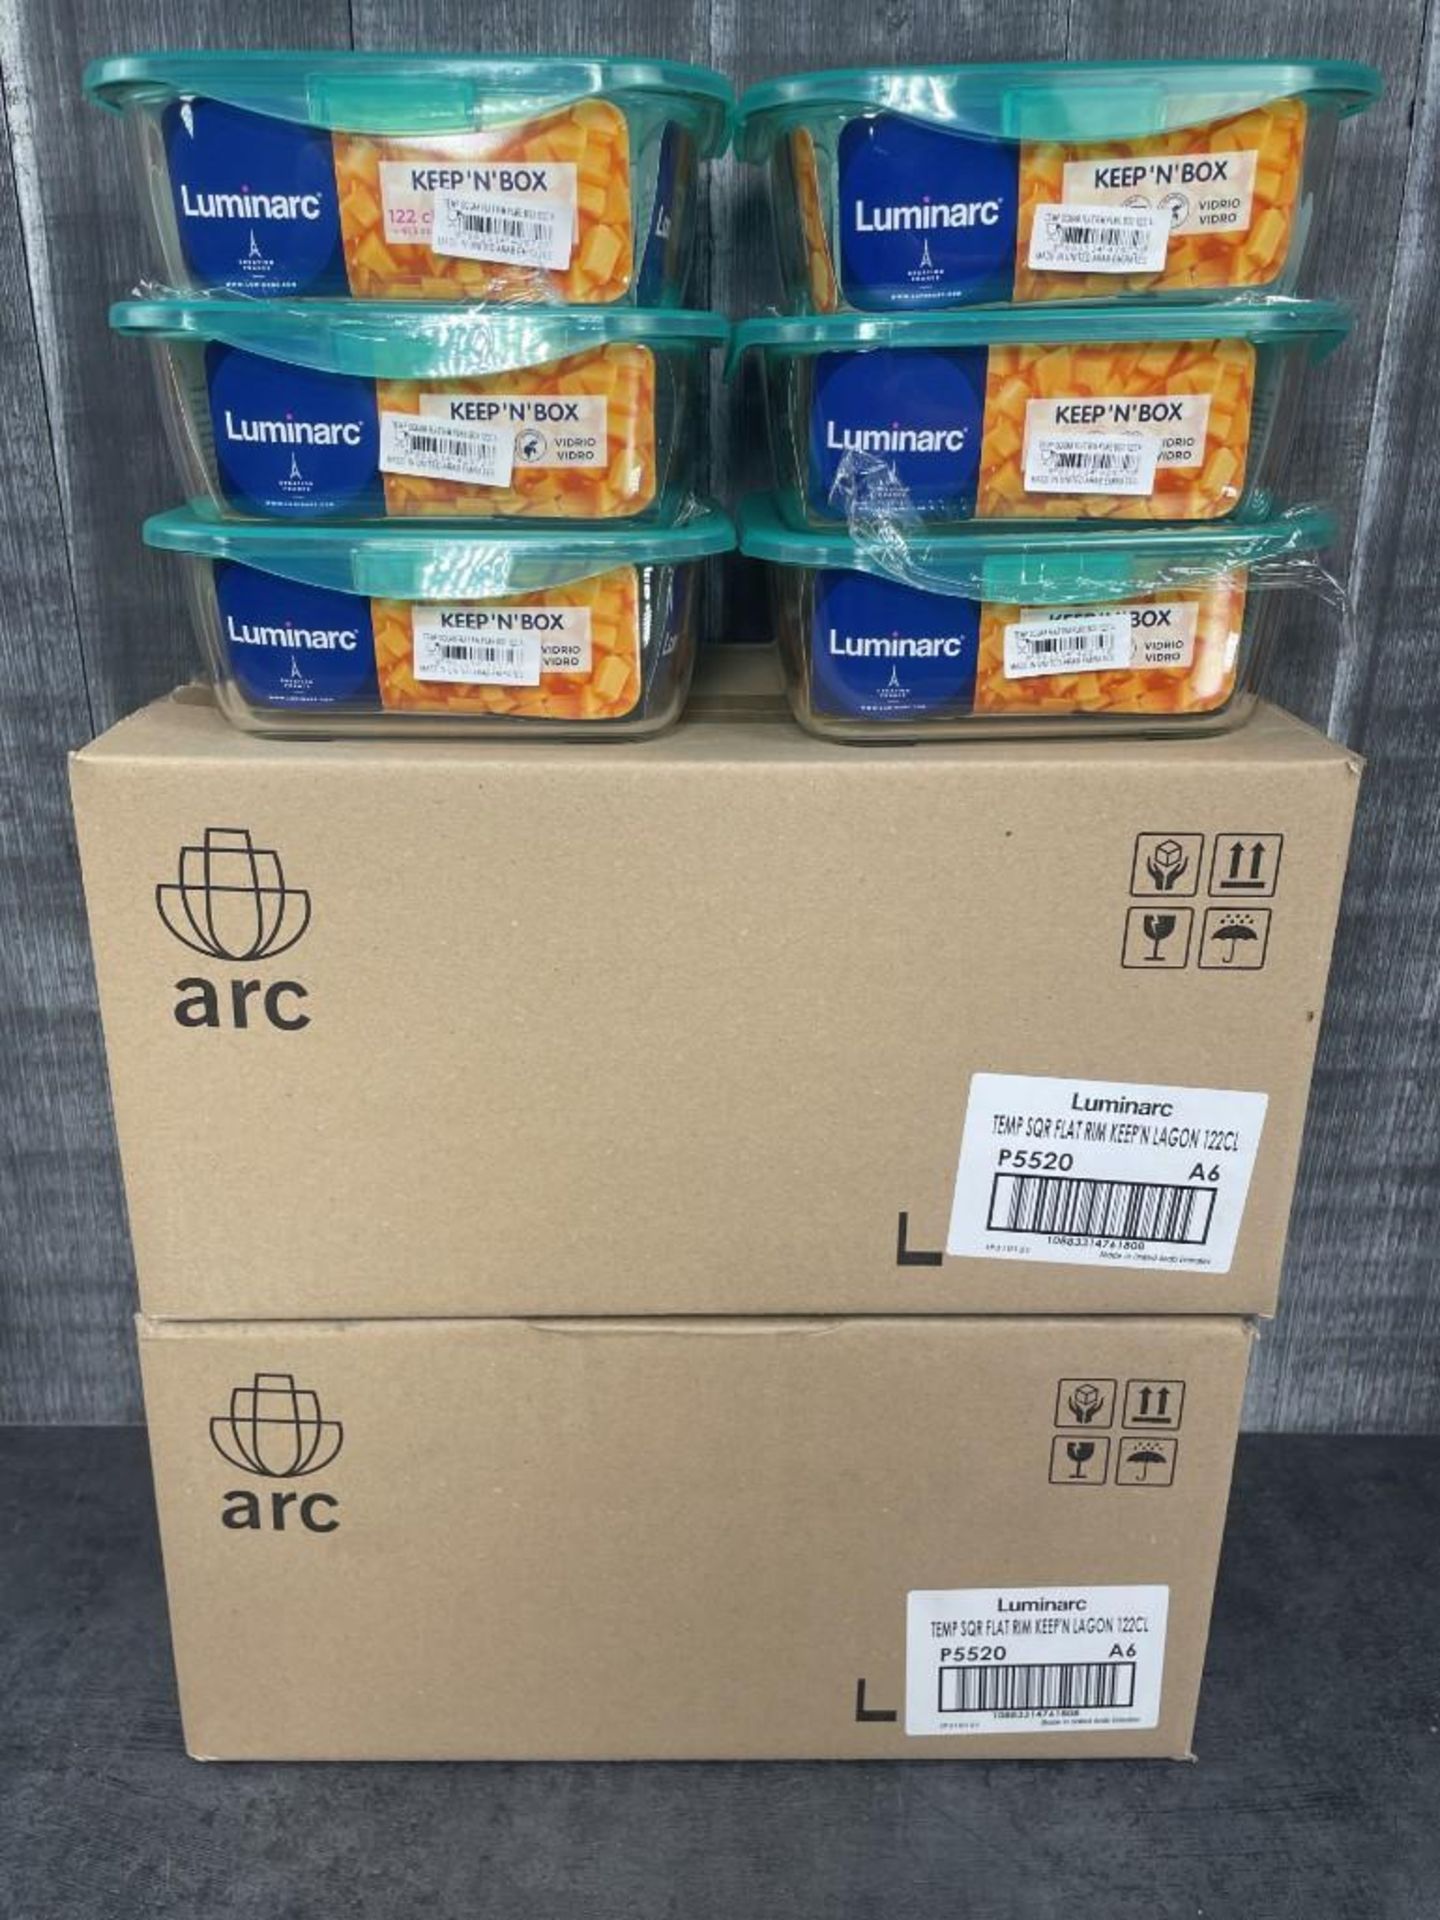 1.22L GLASS SQUARE KEEP N BOXES, ARCOROC P5520 - LOT OF 18 (3 CASES)